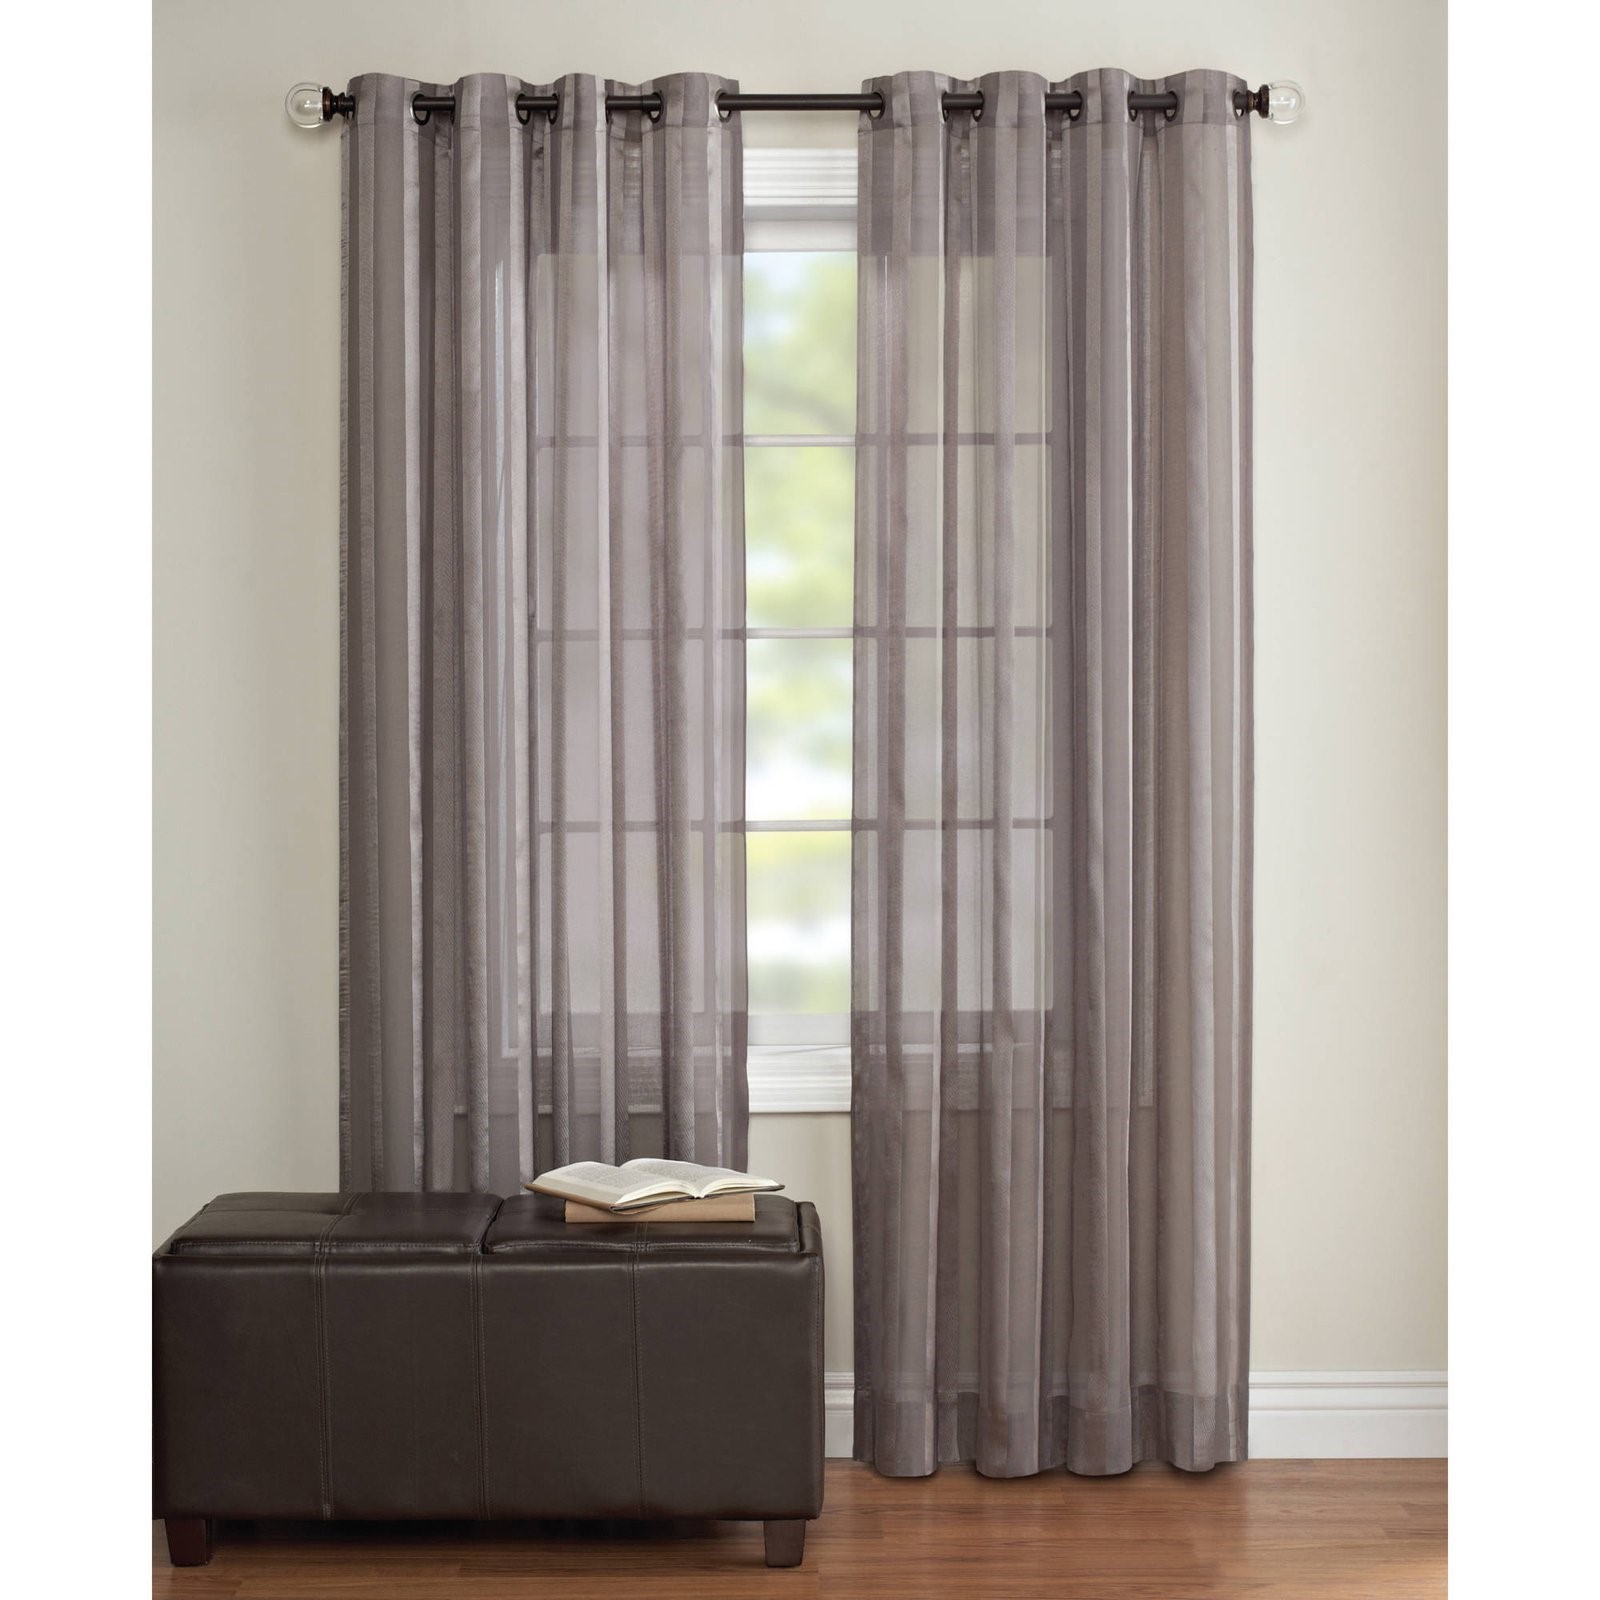 Better Homes and Gardens Toby Textured Stripe Sheer Window Curtain Panel - image 4 of 4